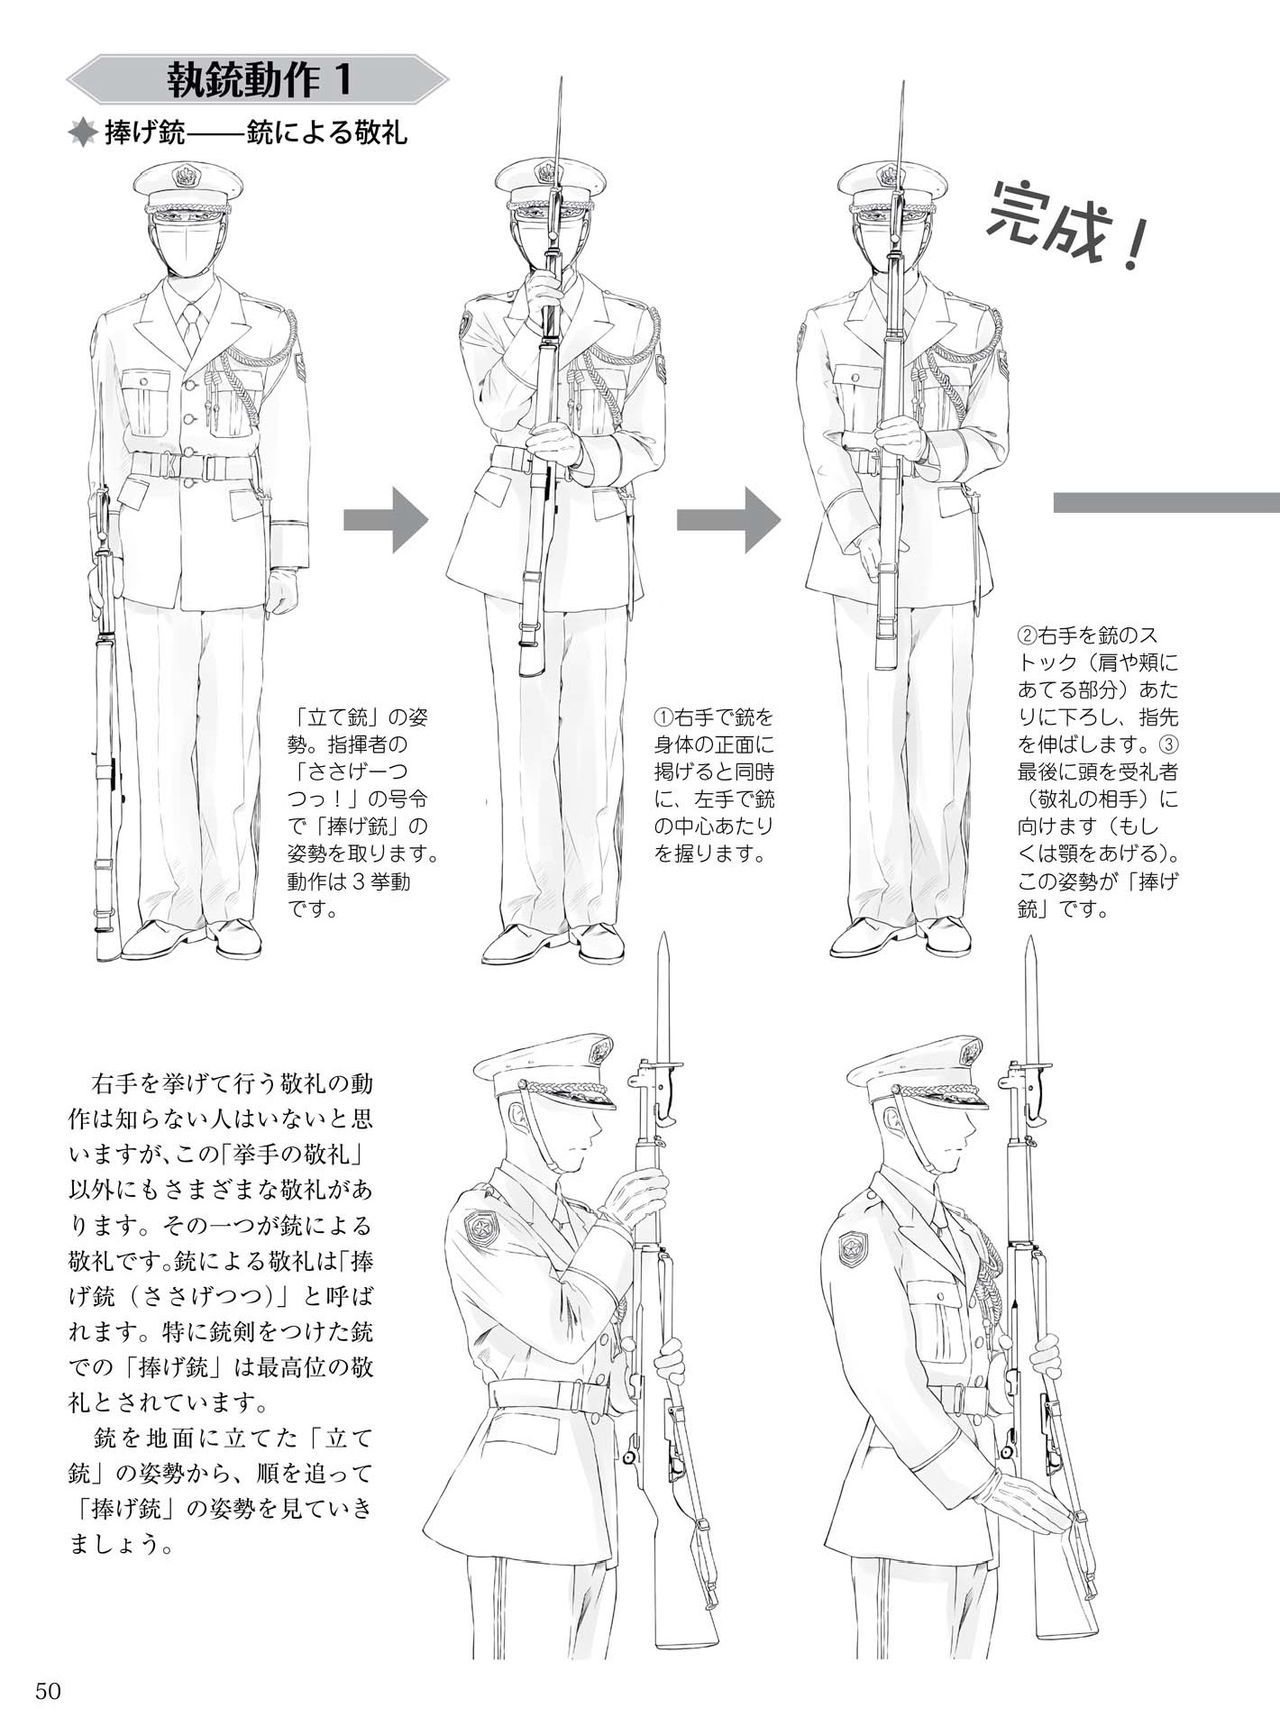 How to draw military uniforms and uniforms From Self-Defense Forces 軍服・制服の描き方 アメリカ軍・自衛隊の制服から戦闘服まで 53